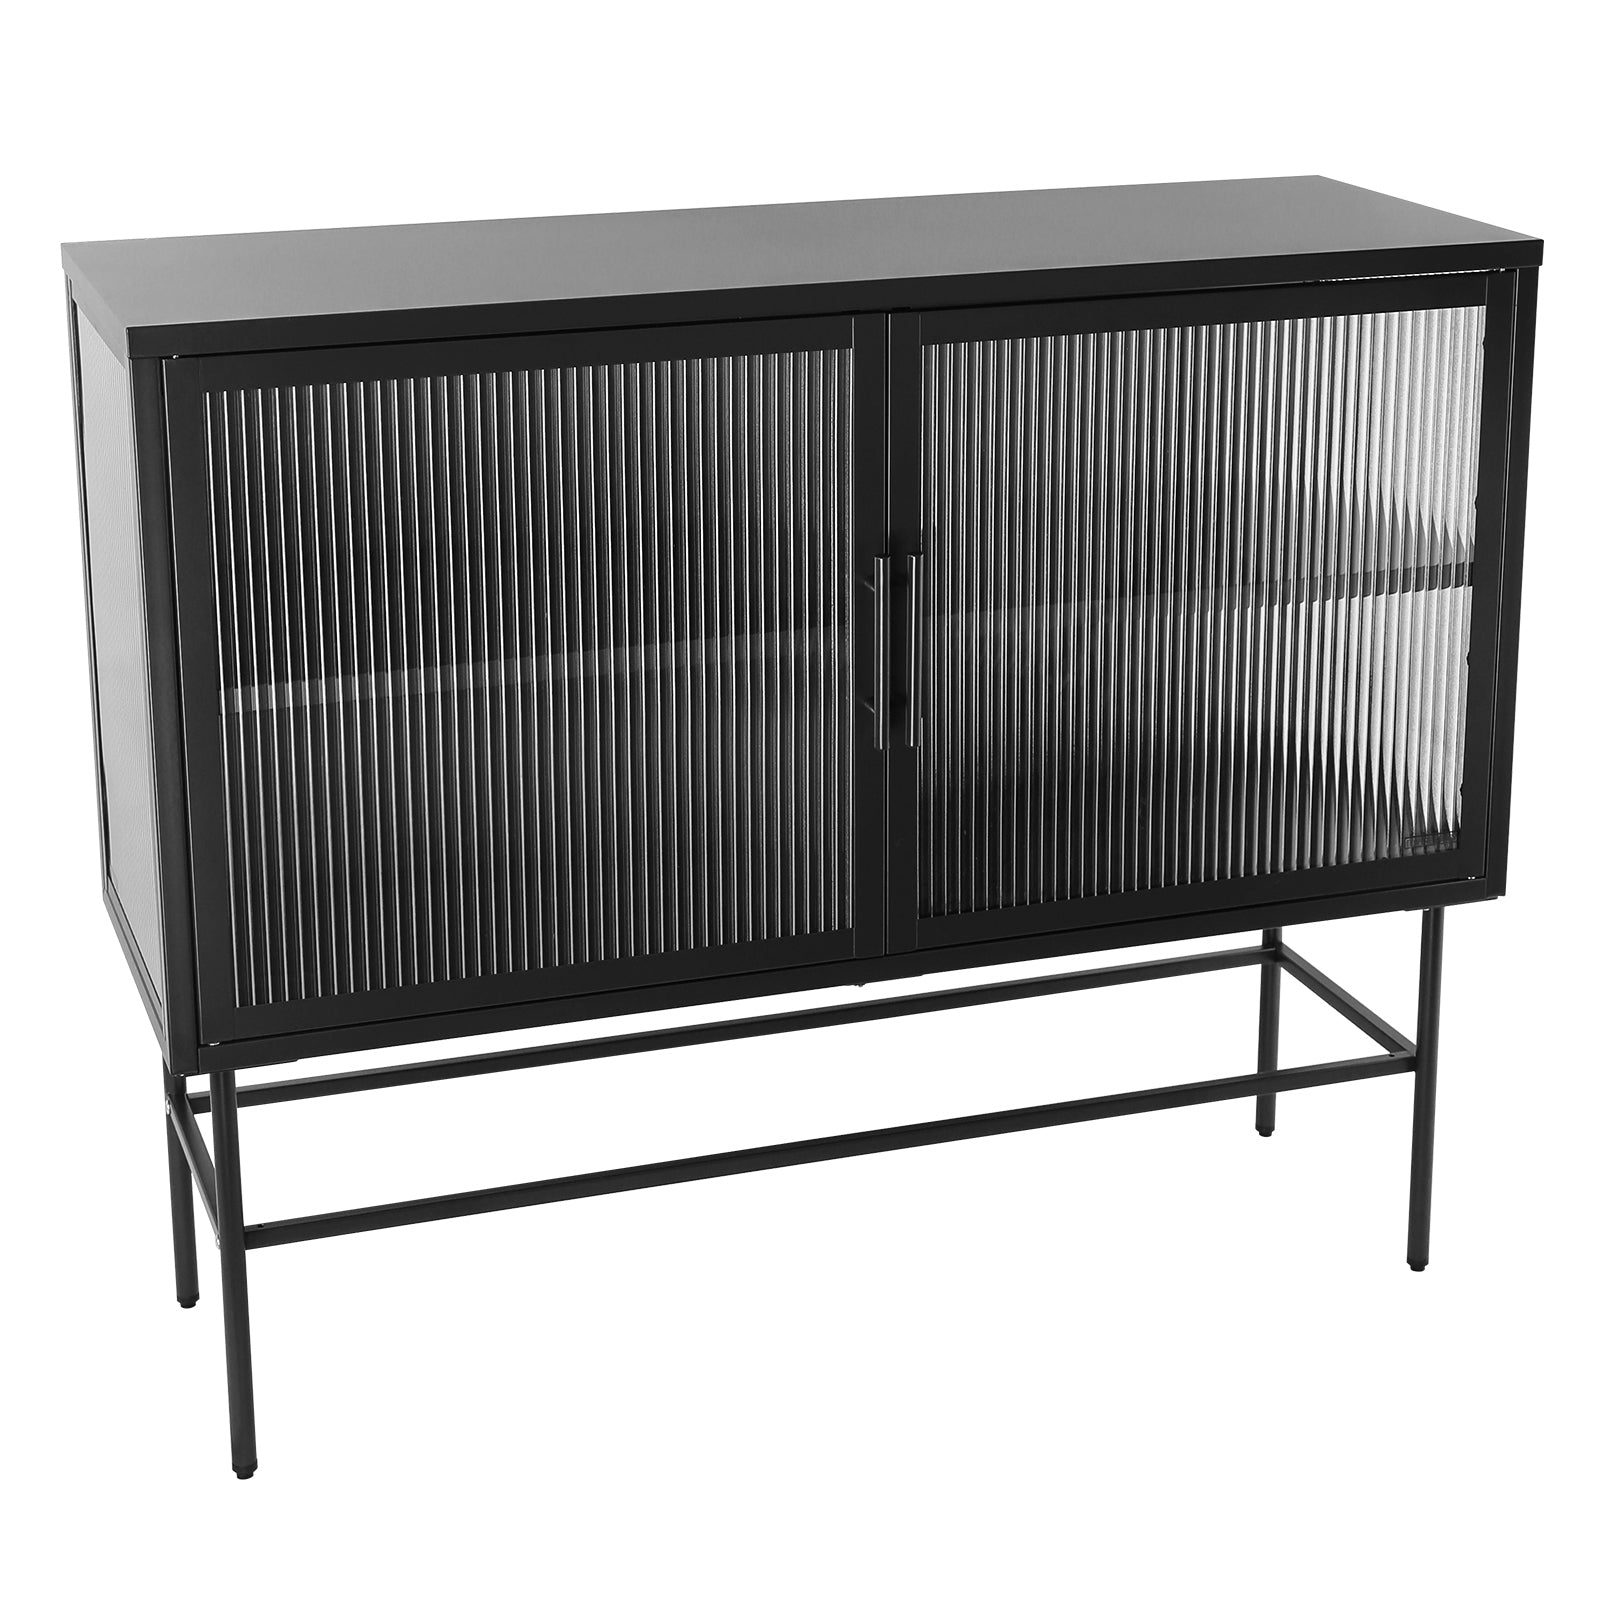 Kitchen Credenza Cabinet With Adjustable Shelf and Feet - Ukerr Home